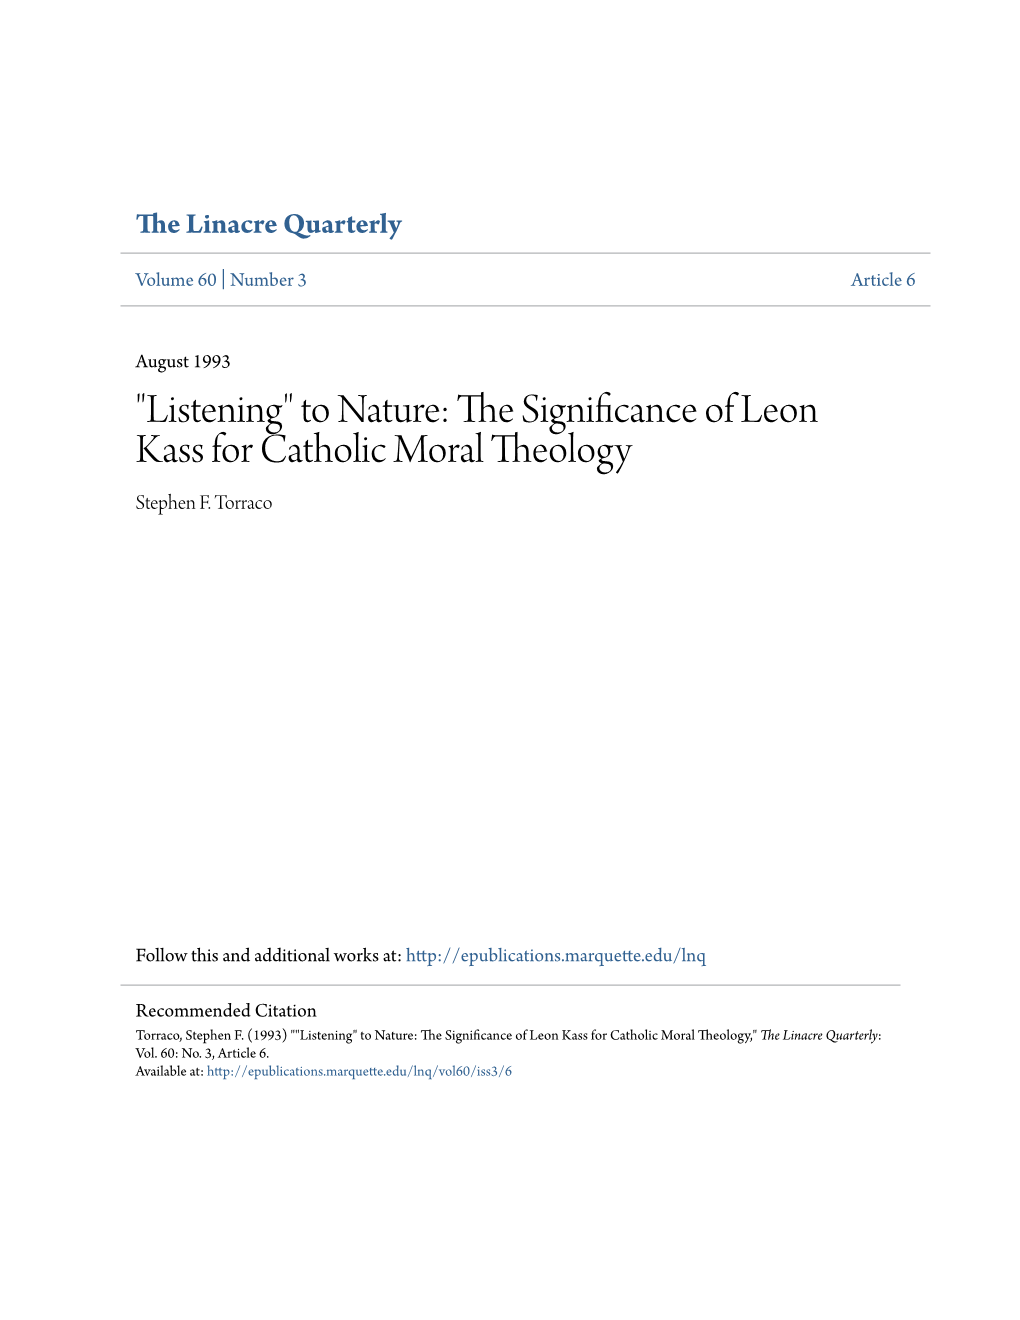 The Significance of Leon Kass for Catholic Moral Theology by Stephen F